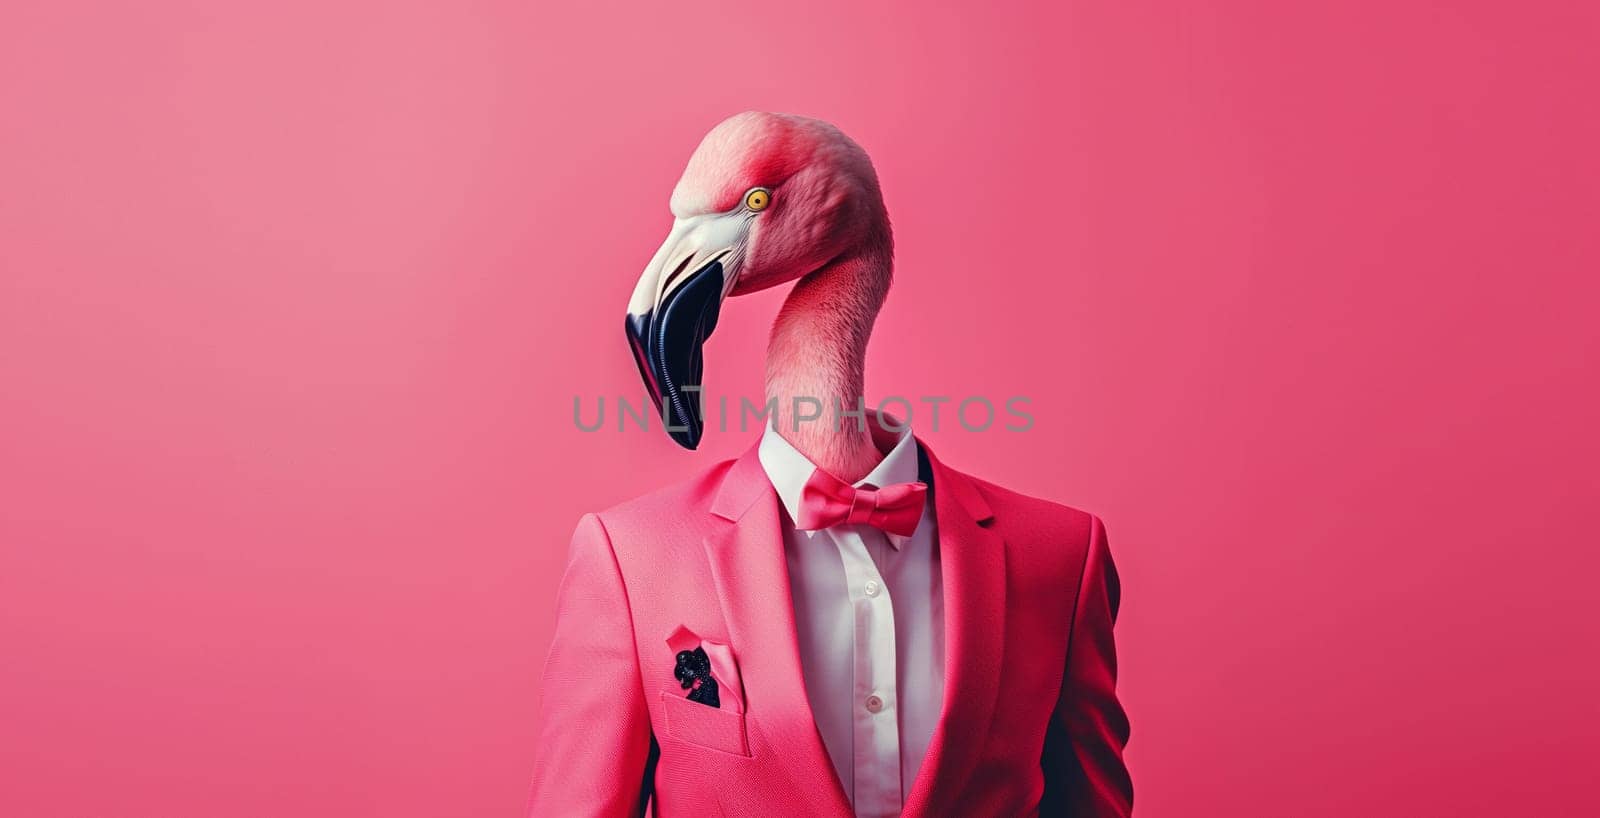 Stylish flamingo bird in a suit looking at the camera on a pink background, animal, creative concept by Rohappy